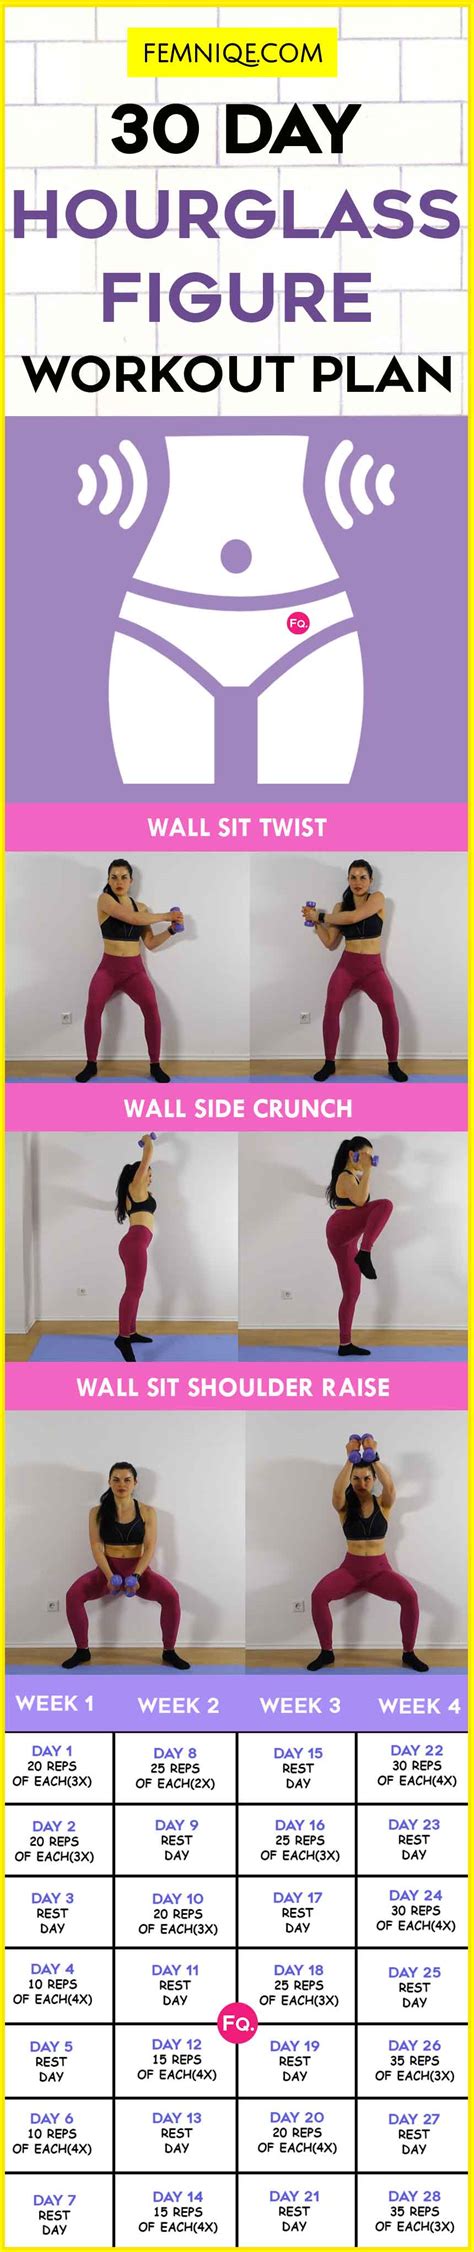 hourglass figure workout in 30 days plan tiny waist and big butt